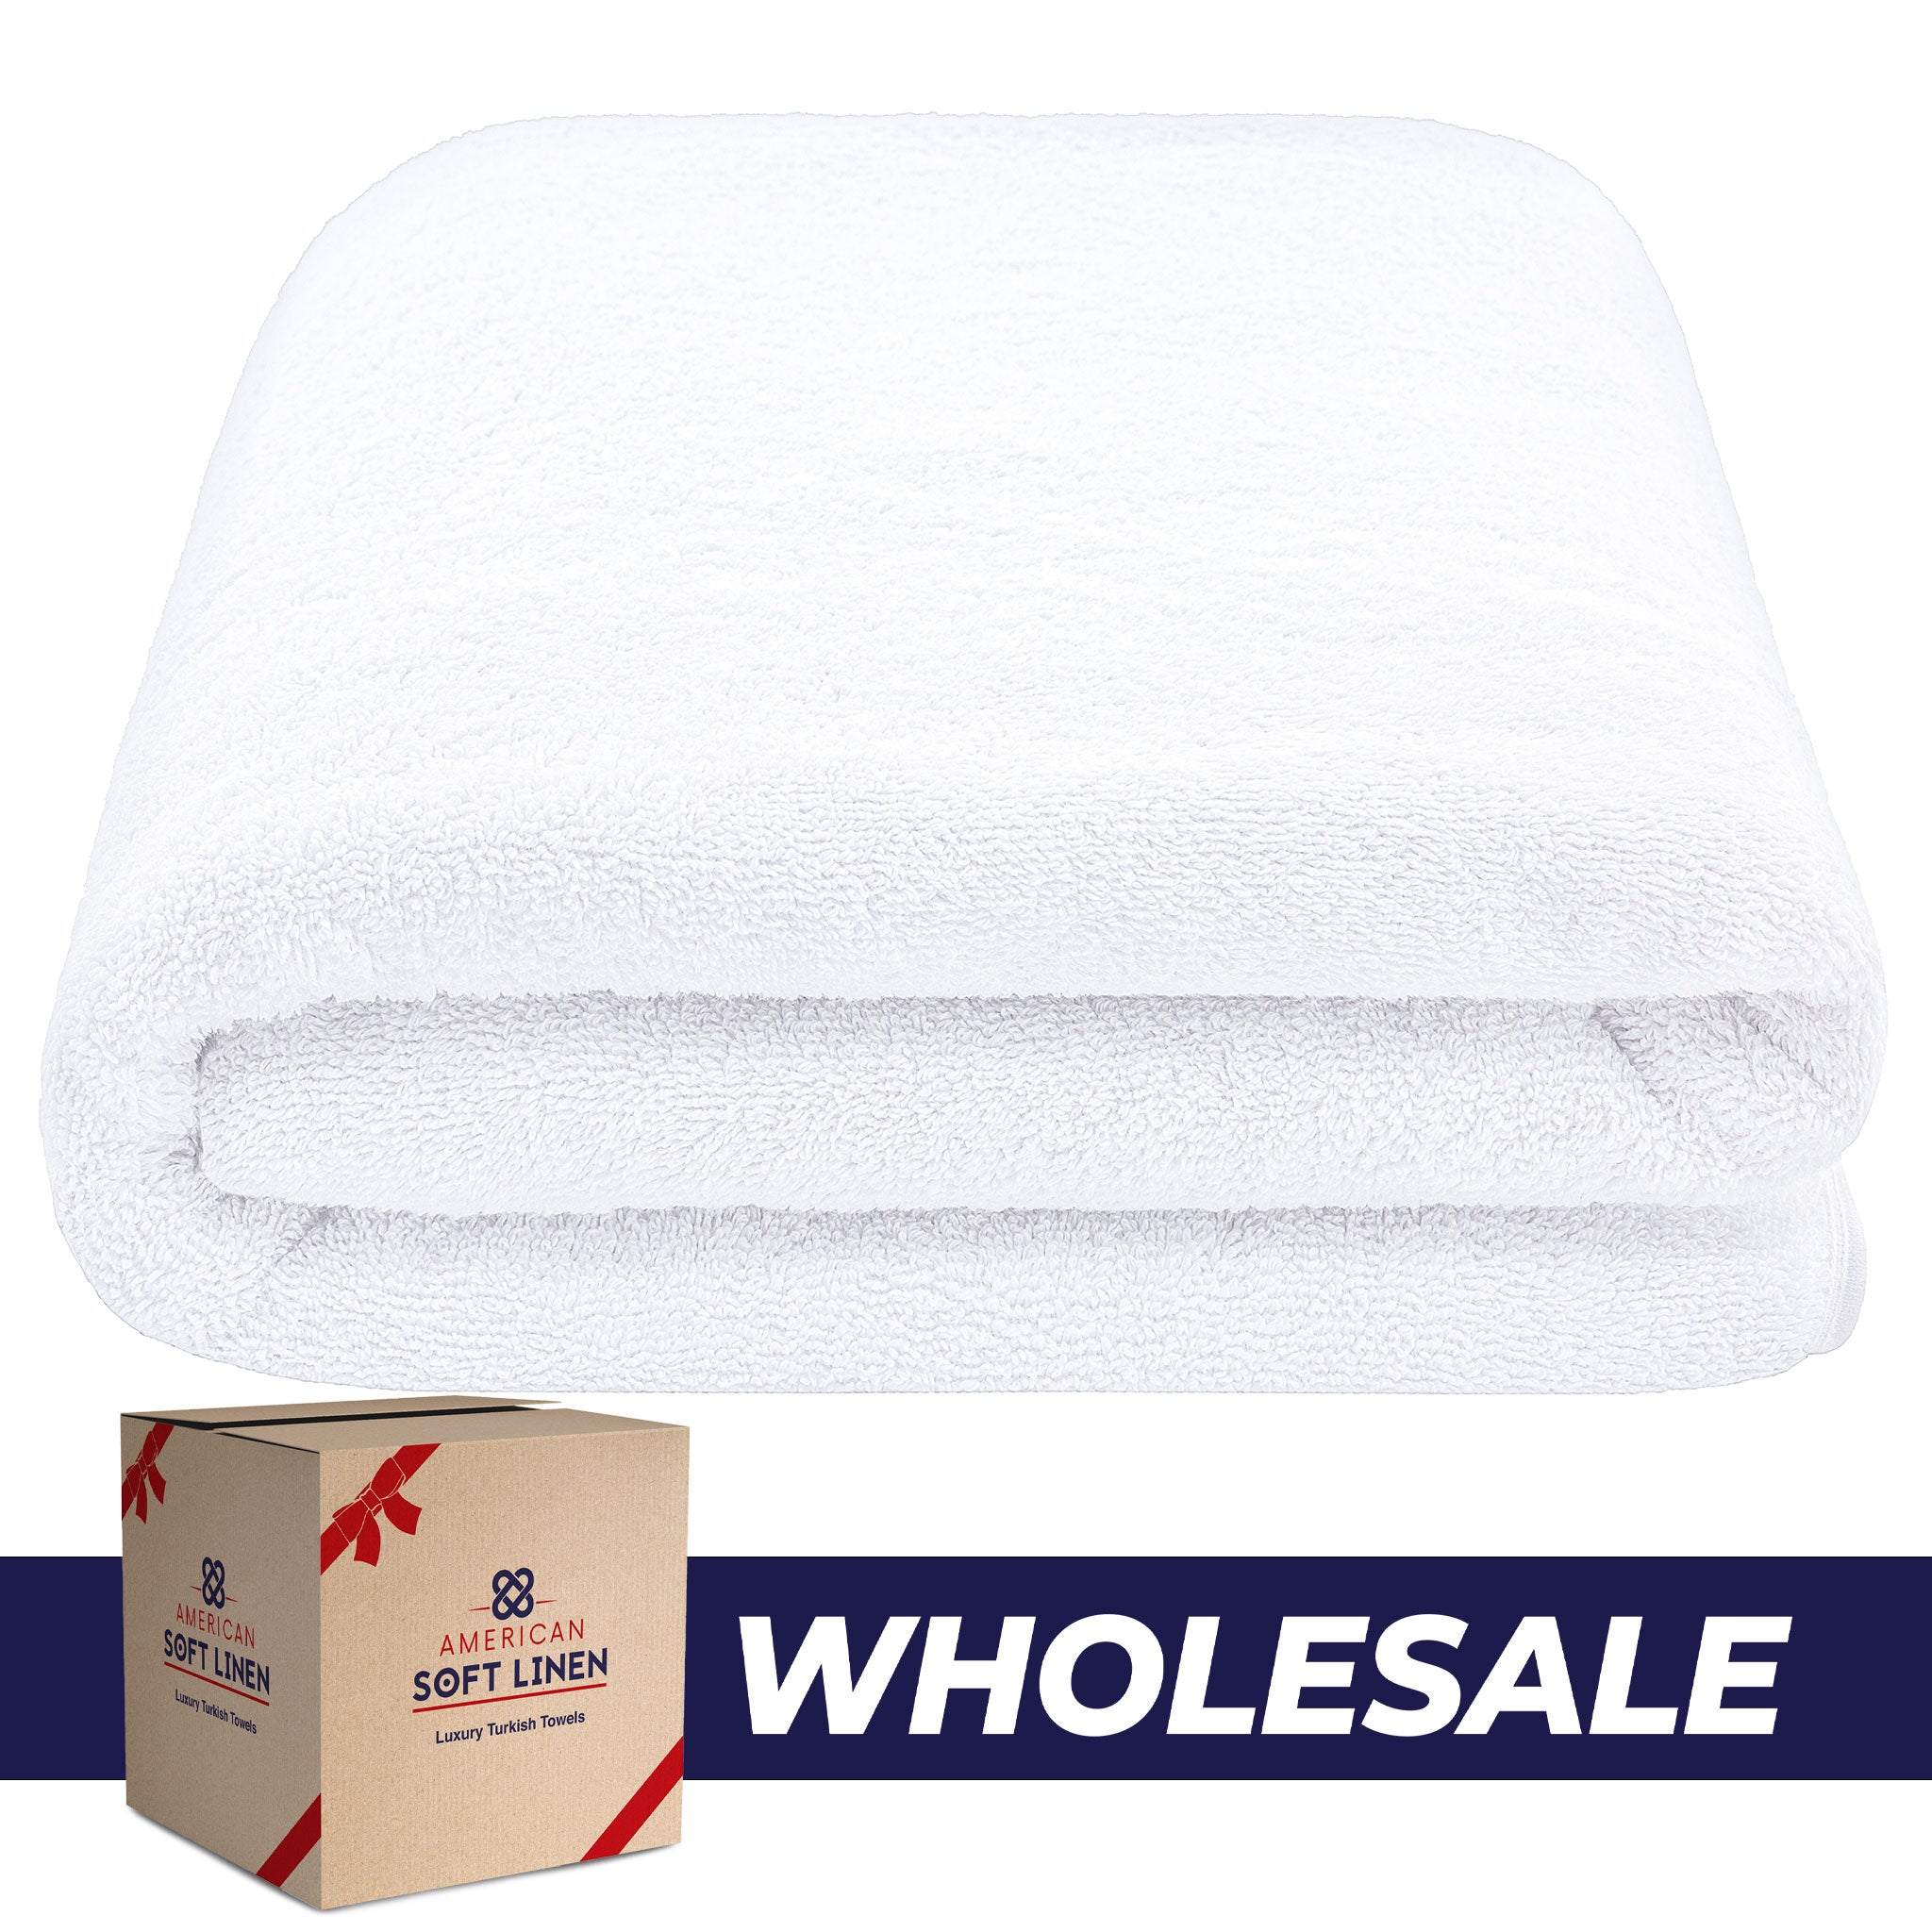 40x80 inch Oversized Bath Sheets - 12 Piece Case Pack White